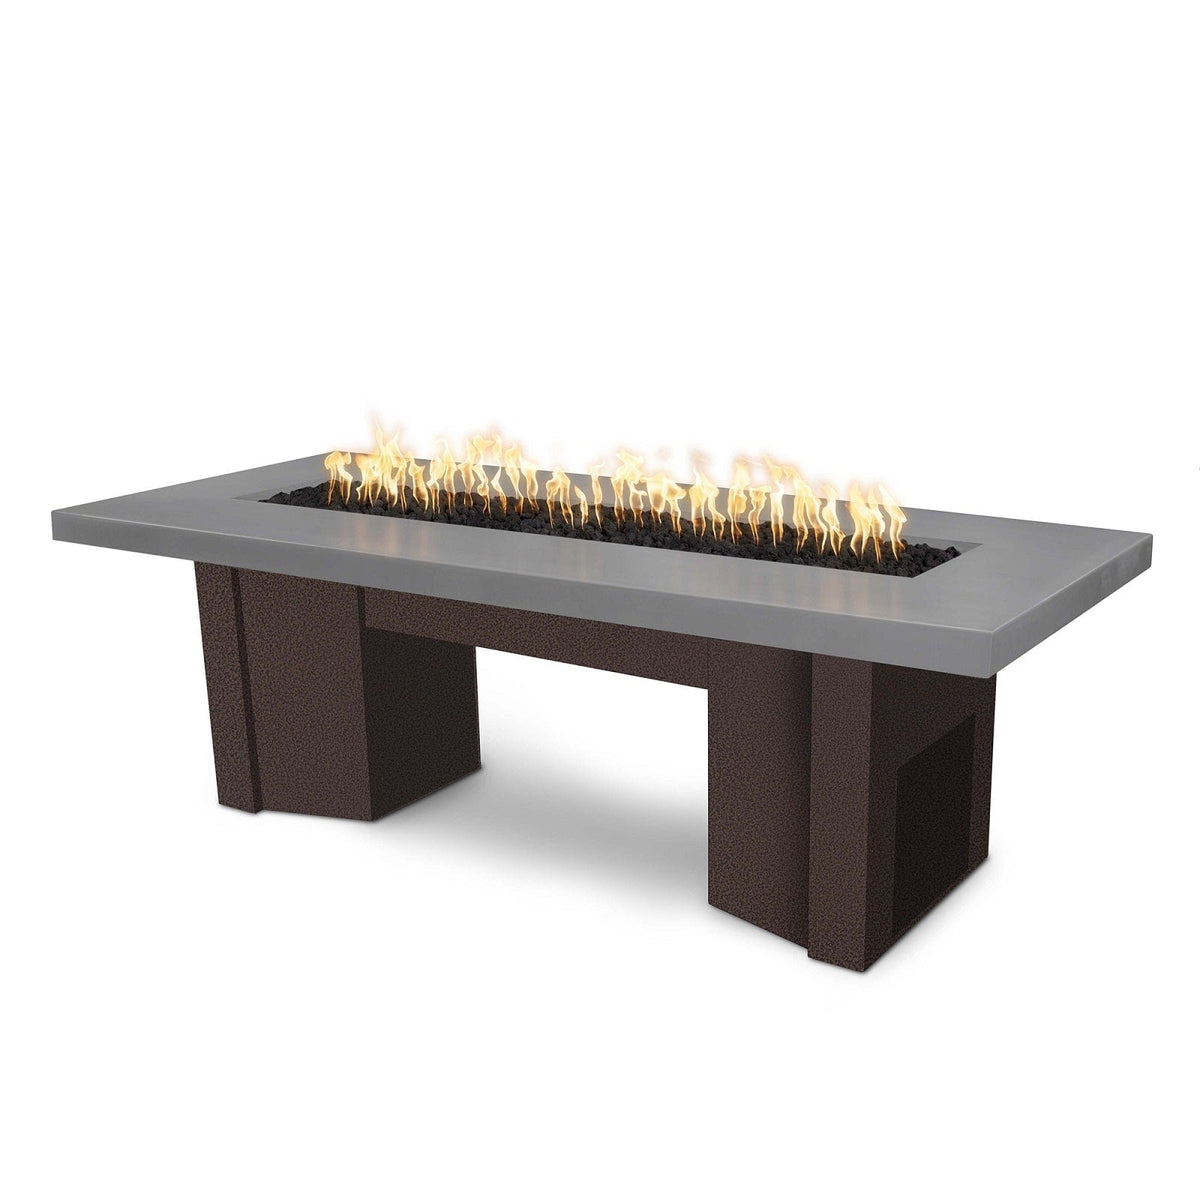 The Outdoor Plus Fire Features Natural Gray (-NGY) / Copper Vein Powder Coated Steel (-CPV) The Outdoor Plus 60&quot; Alameda Fire Table Smooth Concrete in Natural Gas - Flame Sense System with Push Button Spark Igniter / OPT-ALMGFRC60FSEN-NG